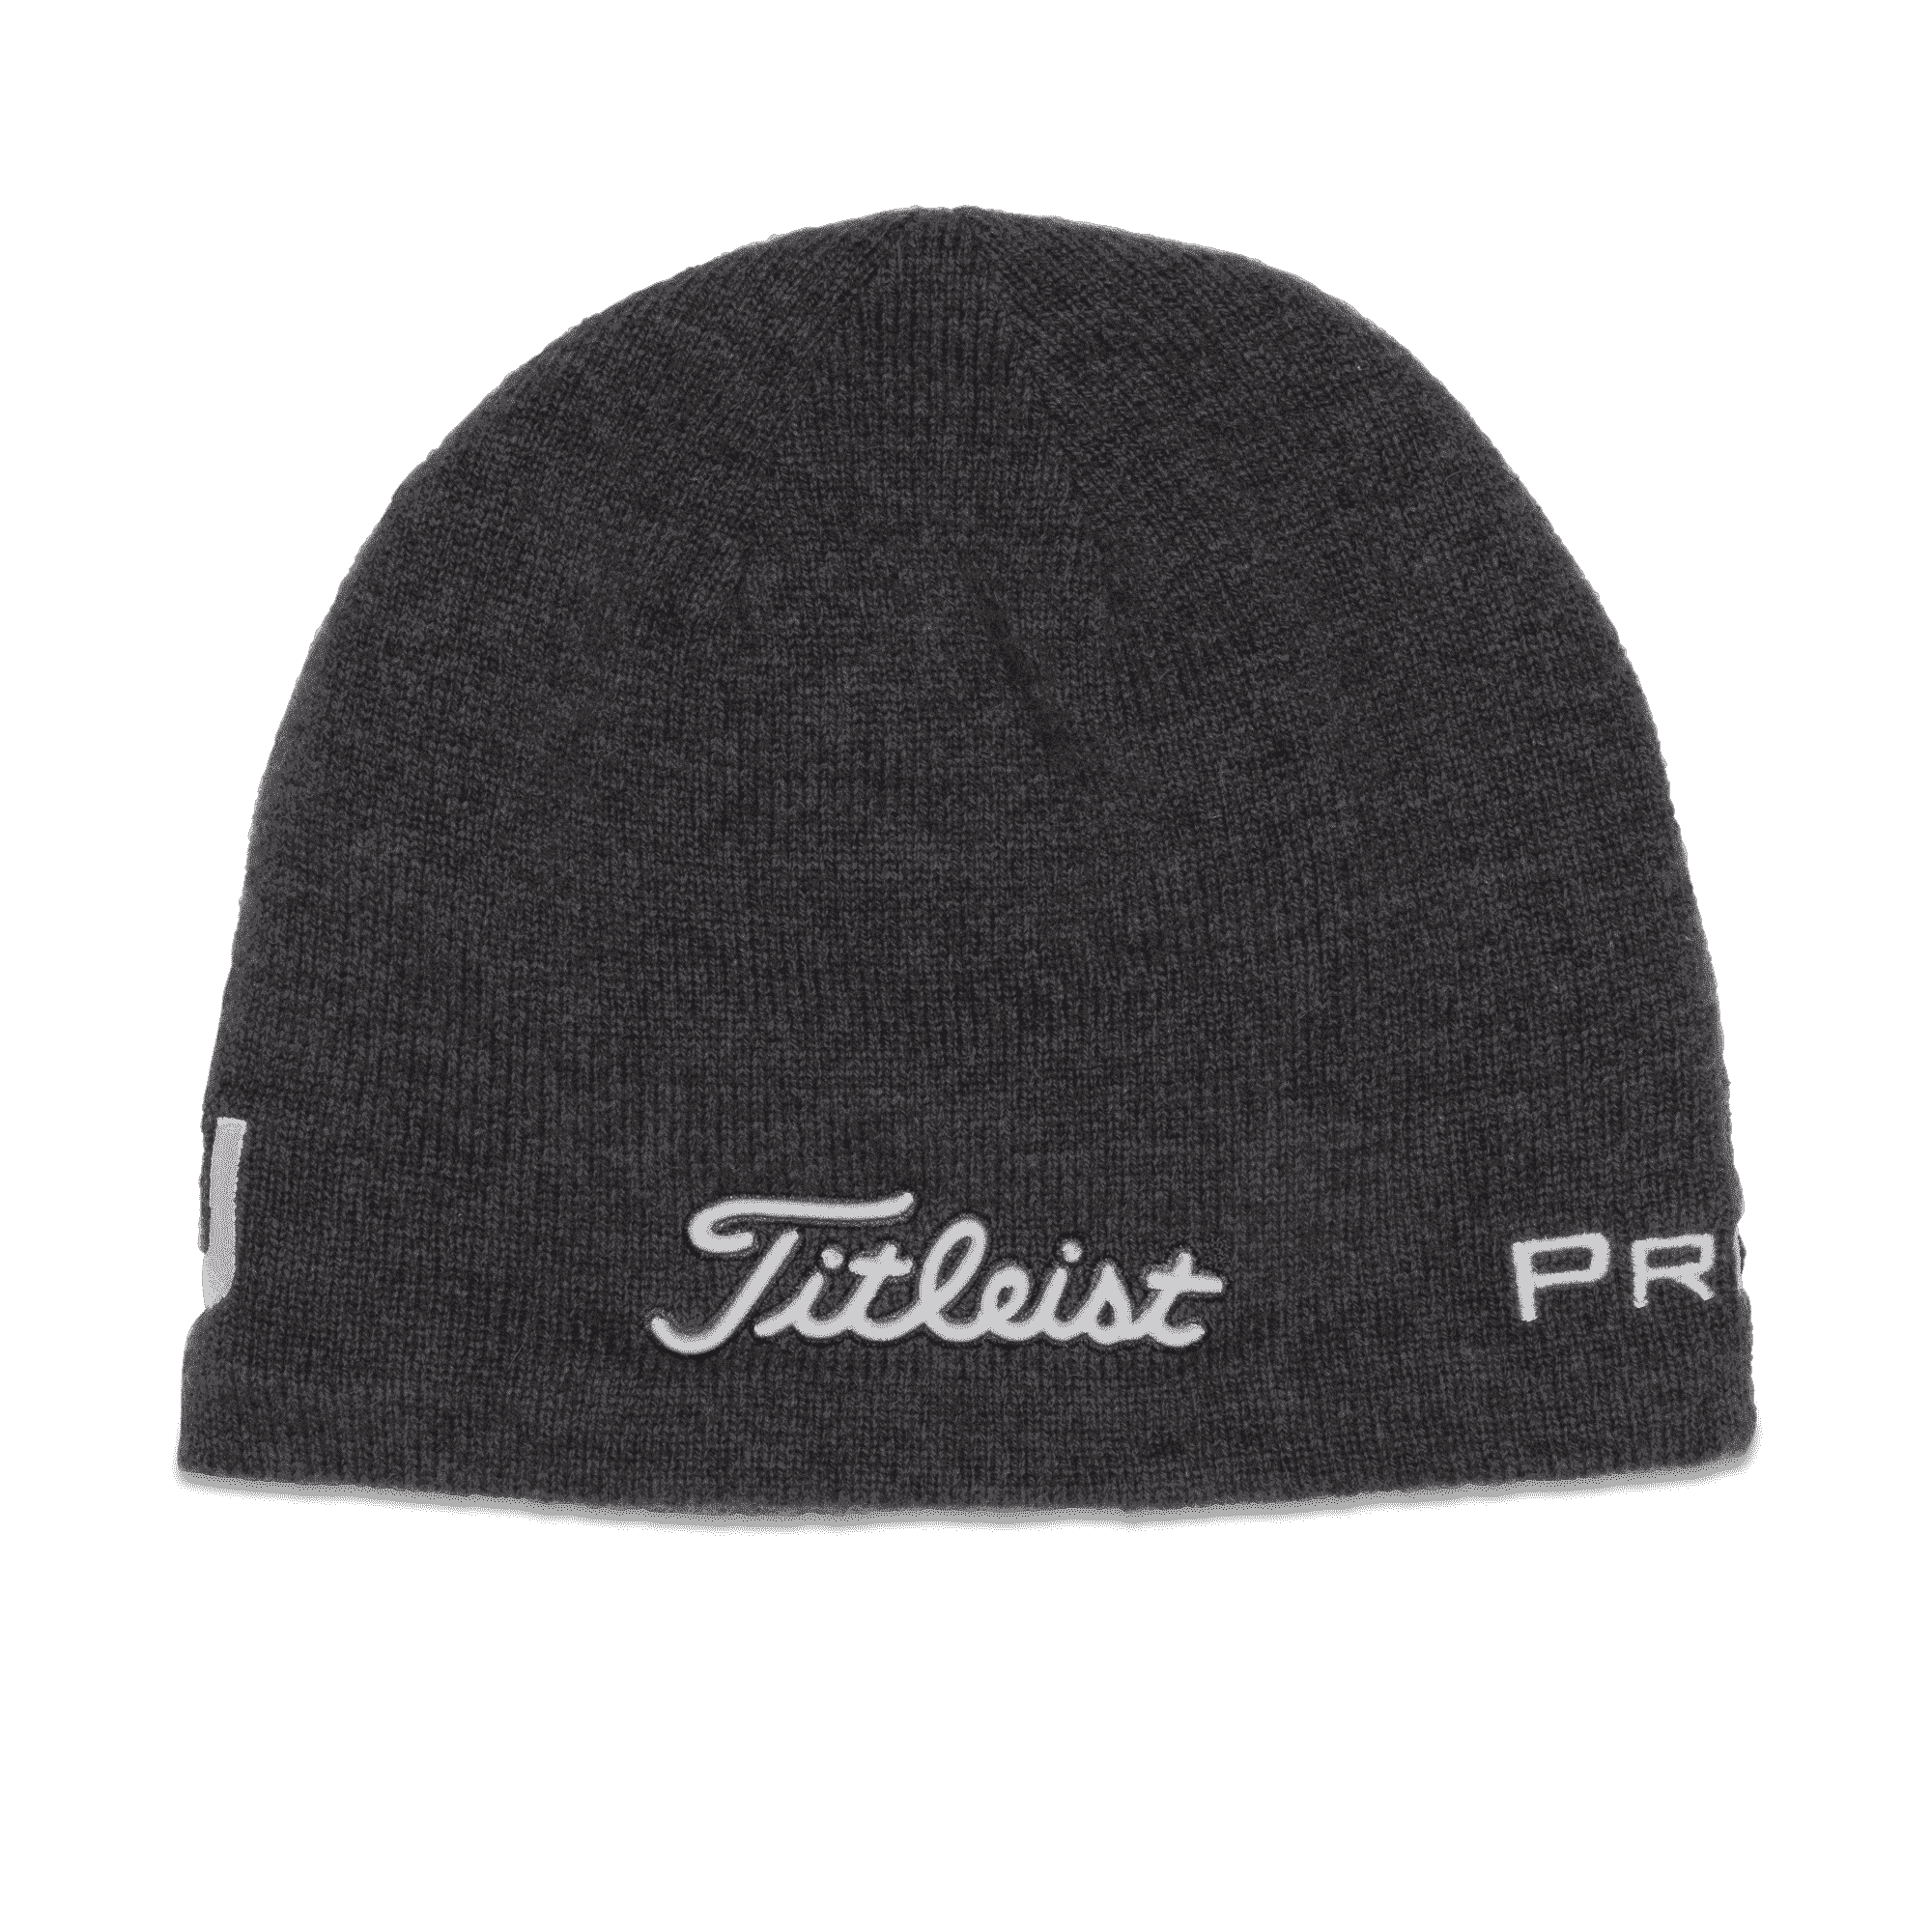 Titleist Official Merino Wool Beanie in Charcoal/White